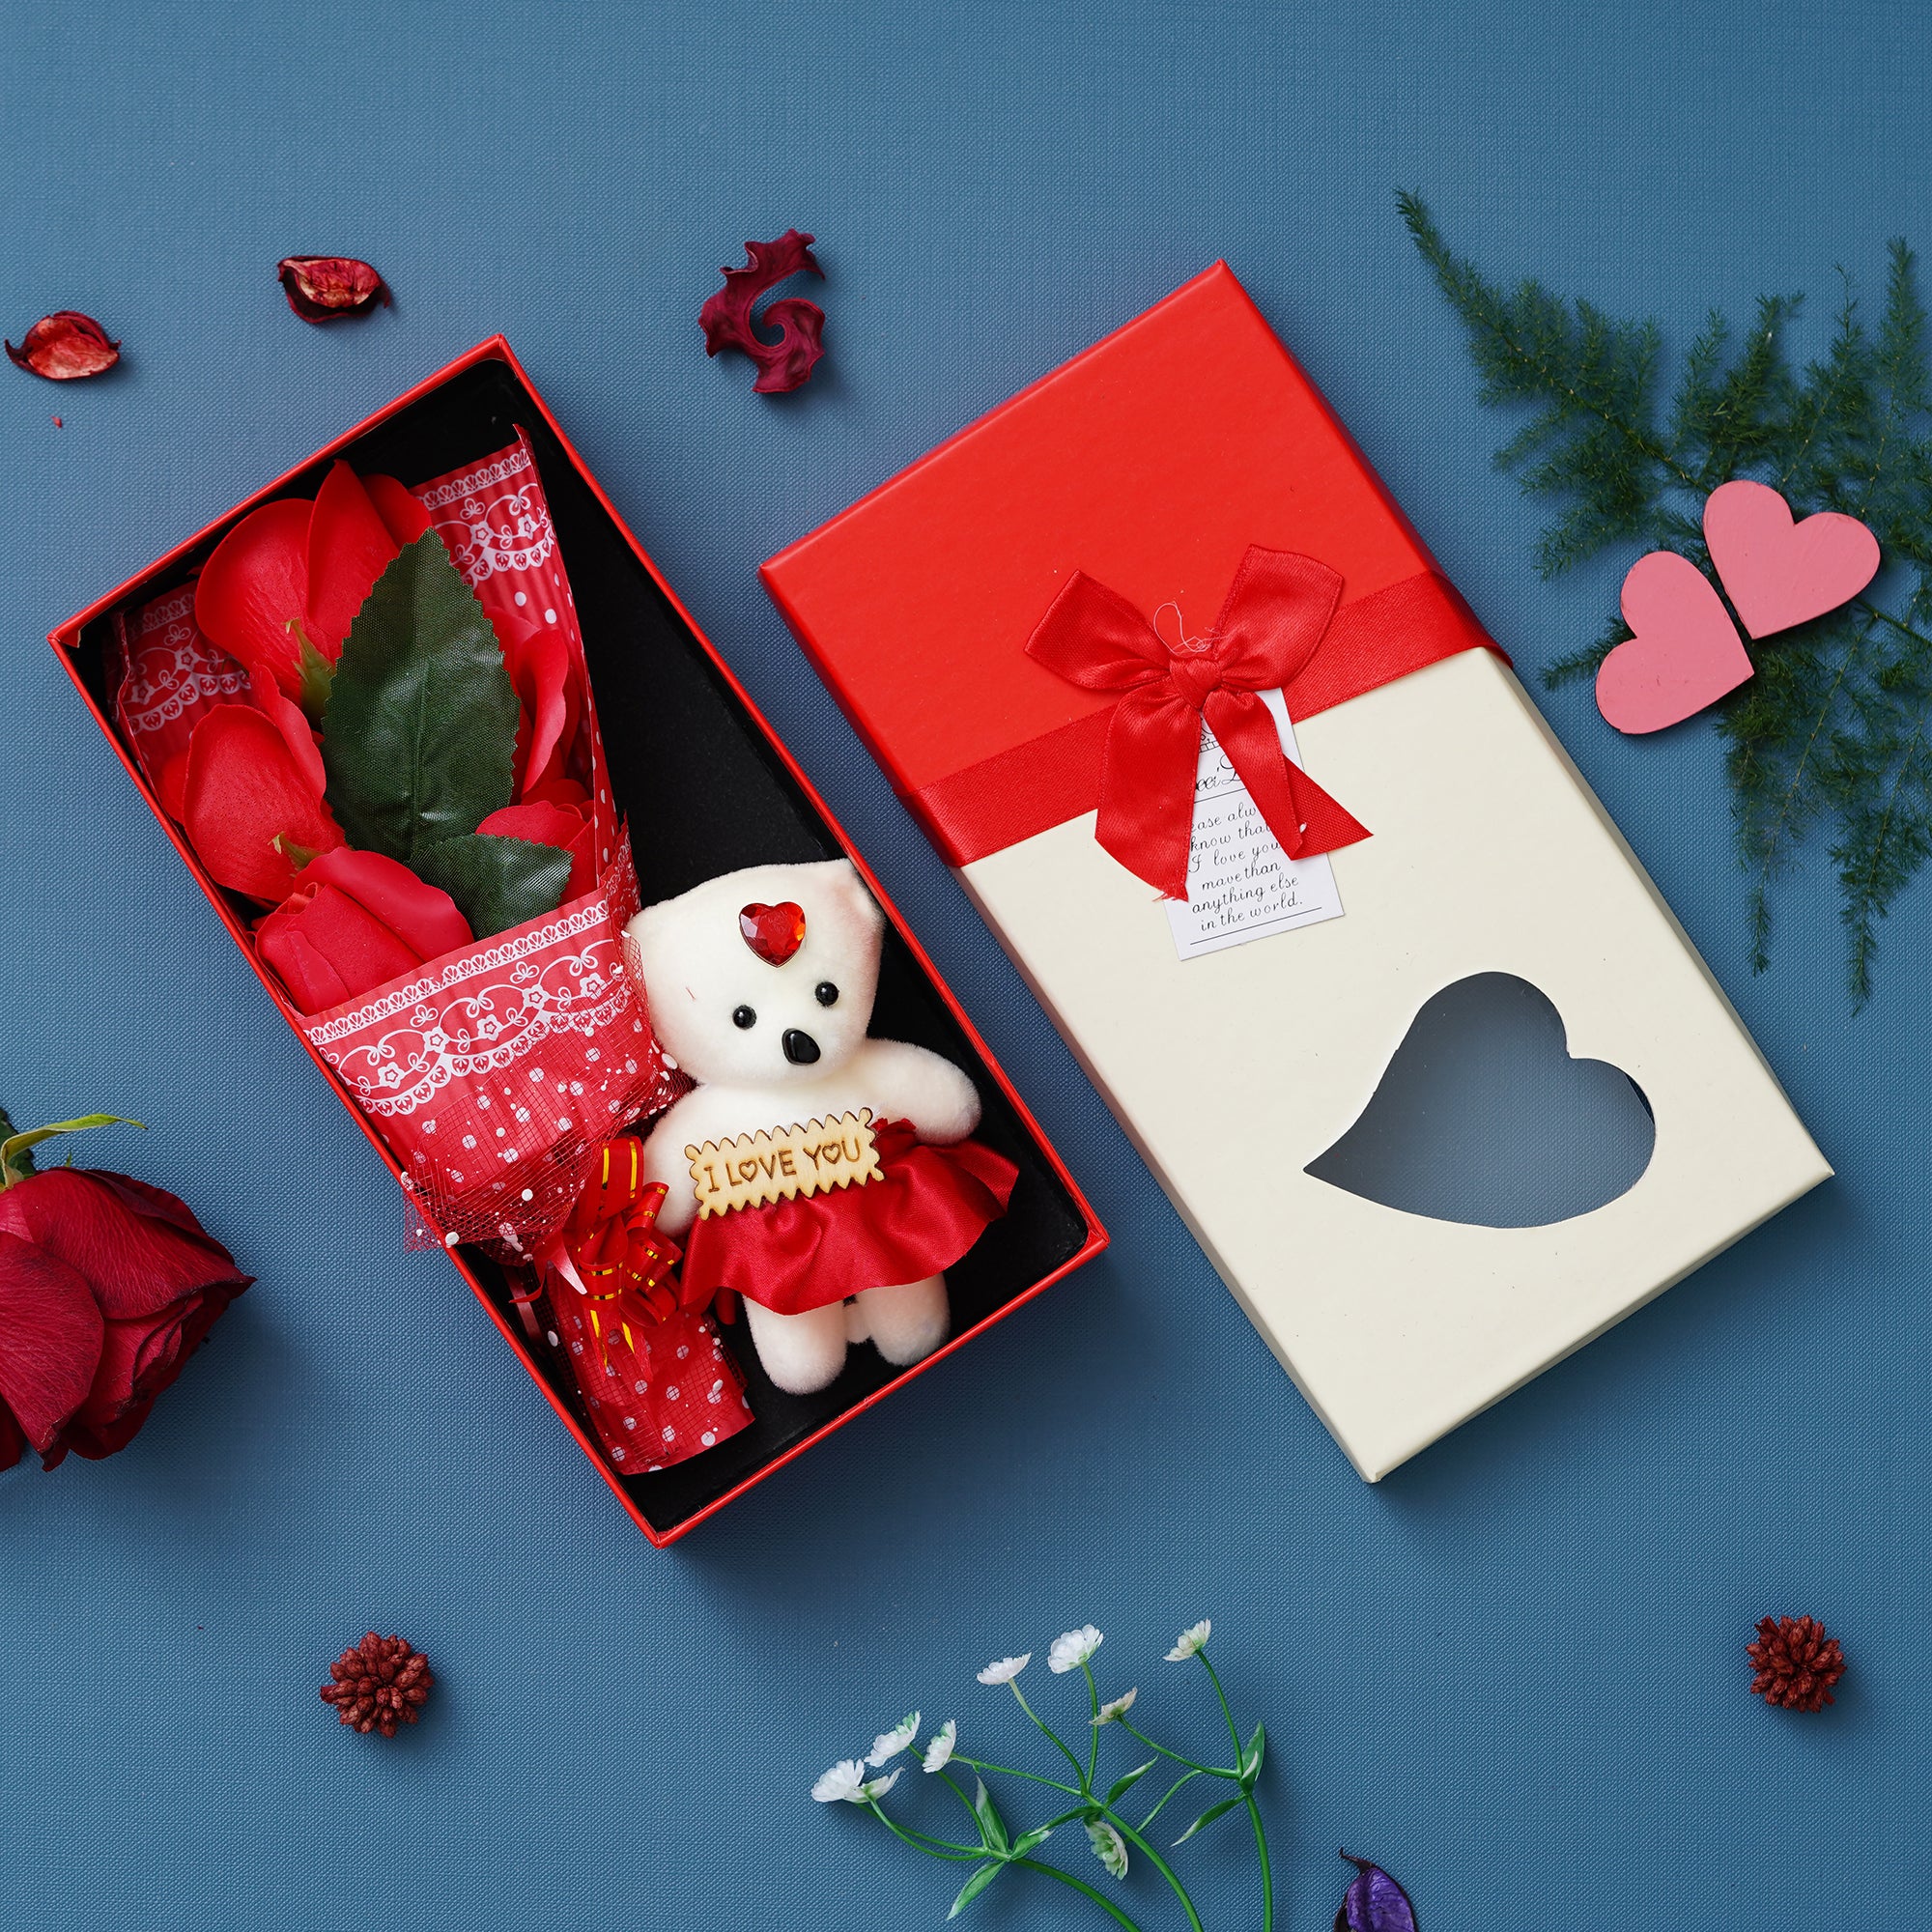 Valentine Combo of Pack of 8 Love Gift Cards, Hands Showcasing Red Heart Gift Set, Red Roses Bouquet and White, Red Teddy Bear Valentine's Rectangle Shaped Gift Box 5